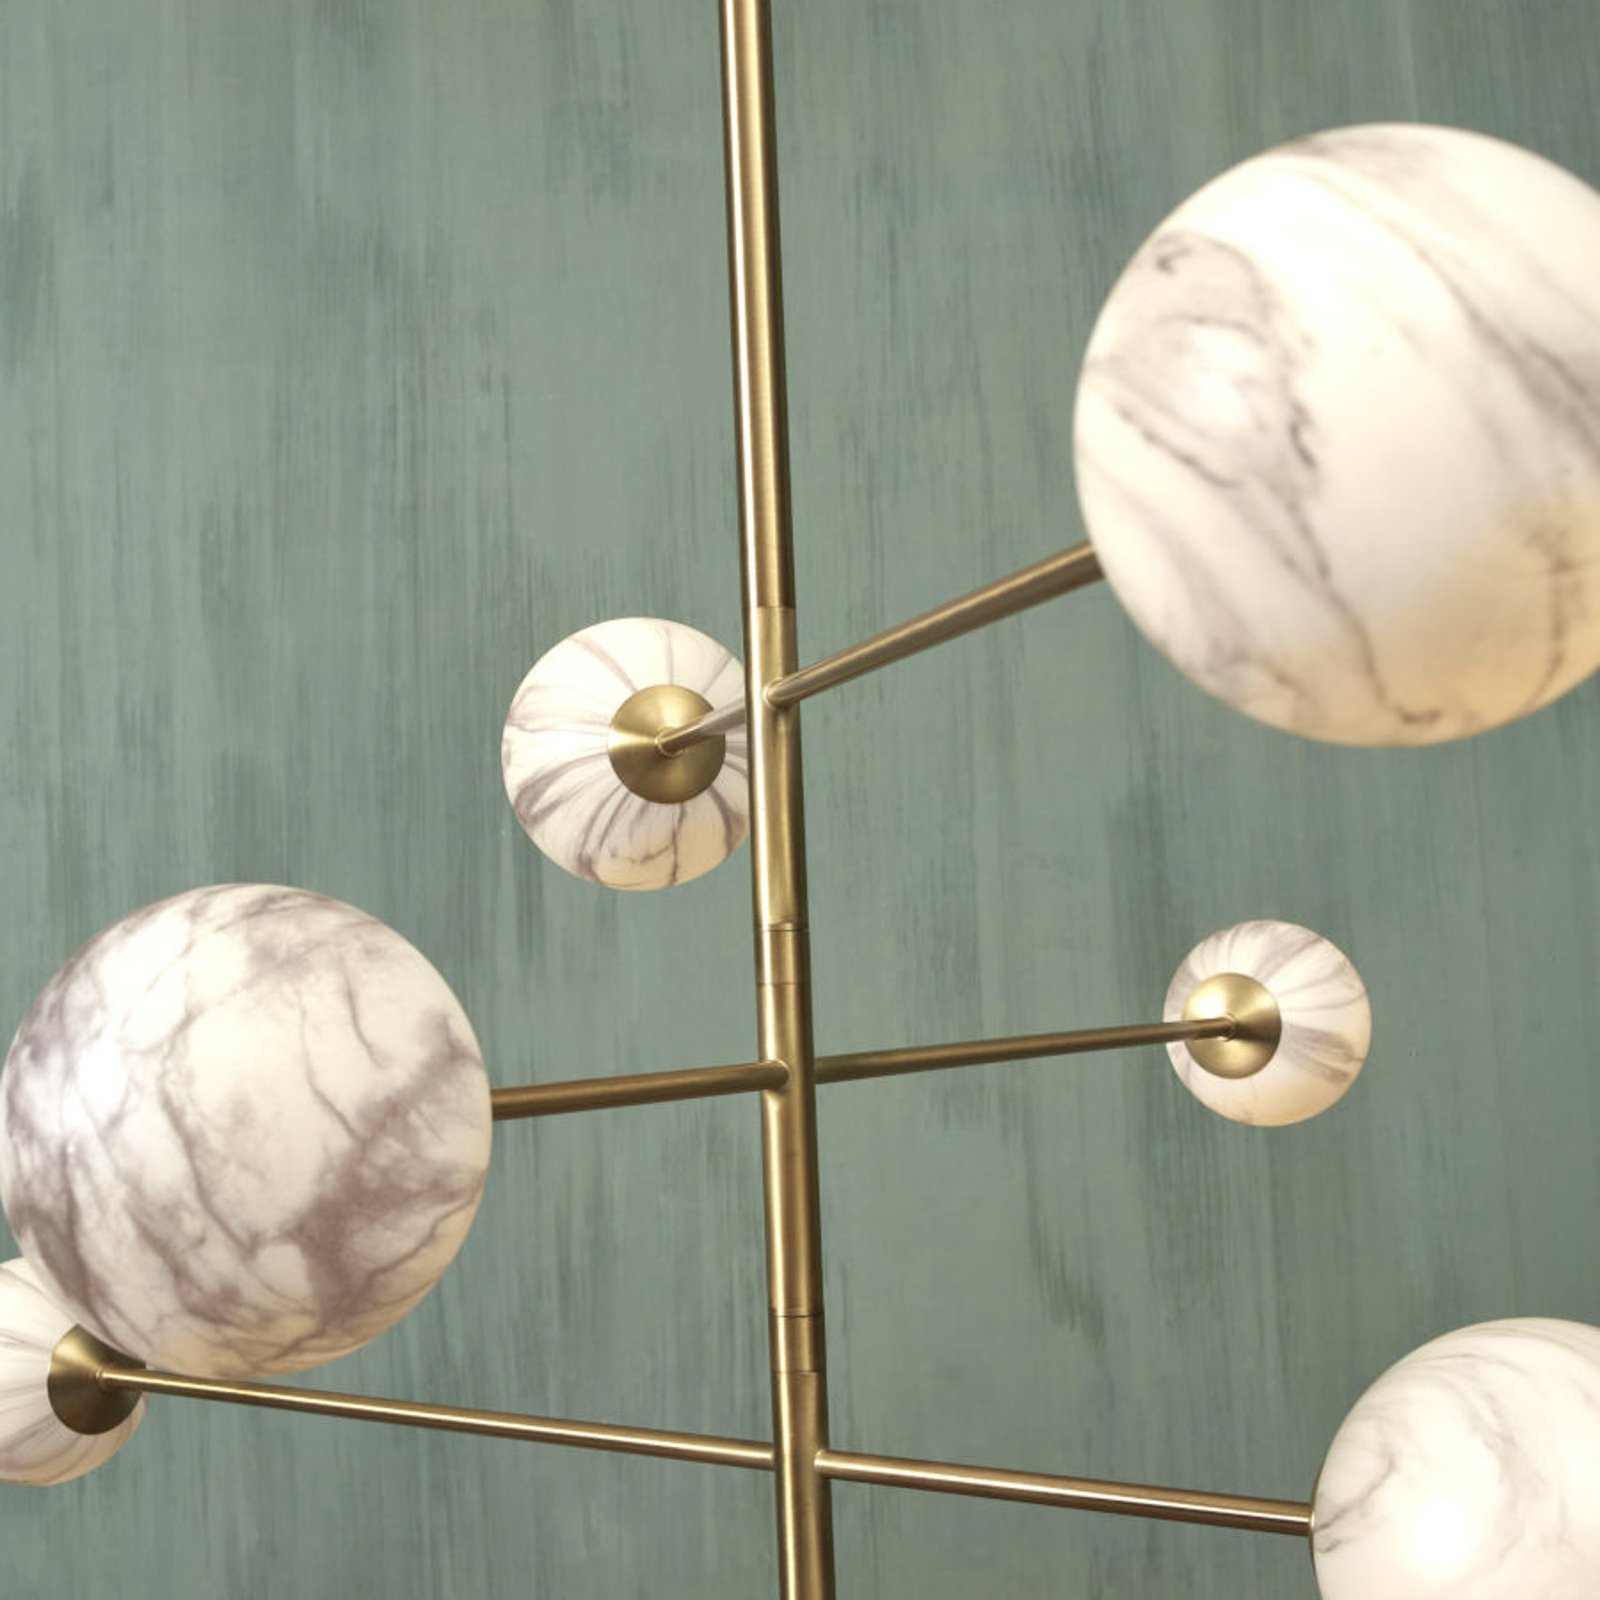 It's about RoMi Carrara suspension 6 lampes ronde